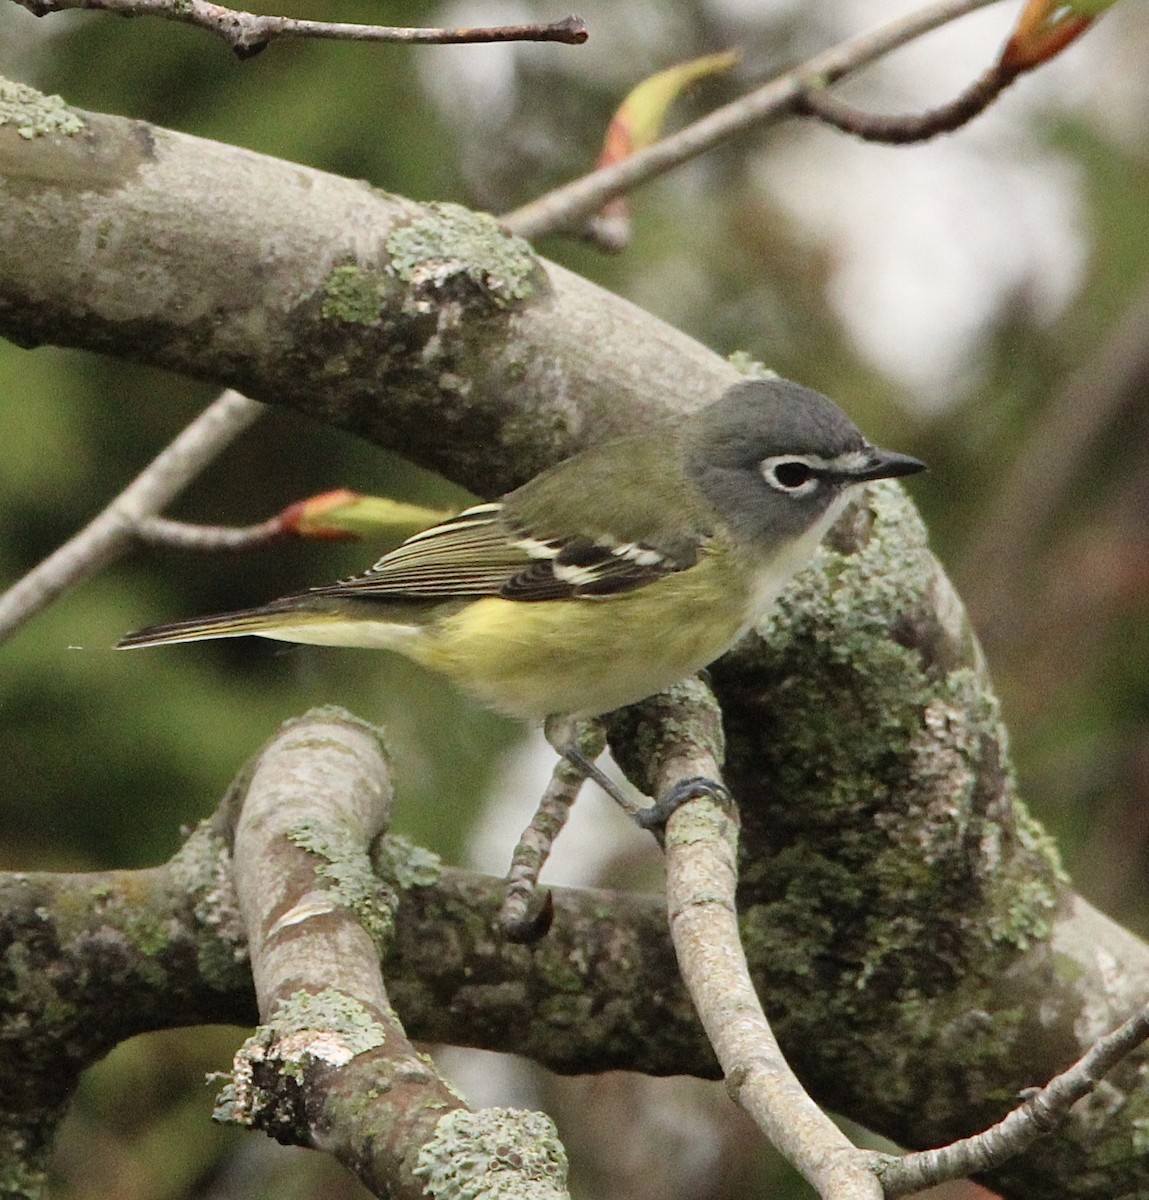 Blue-headed Vireo - Candace Evans